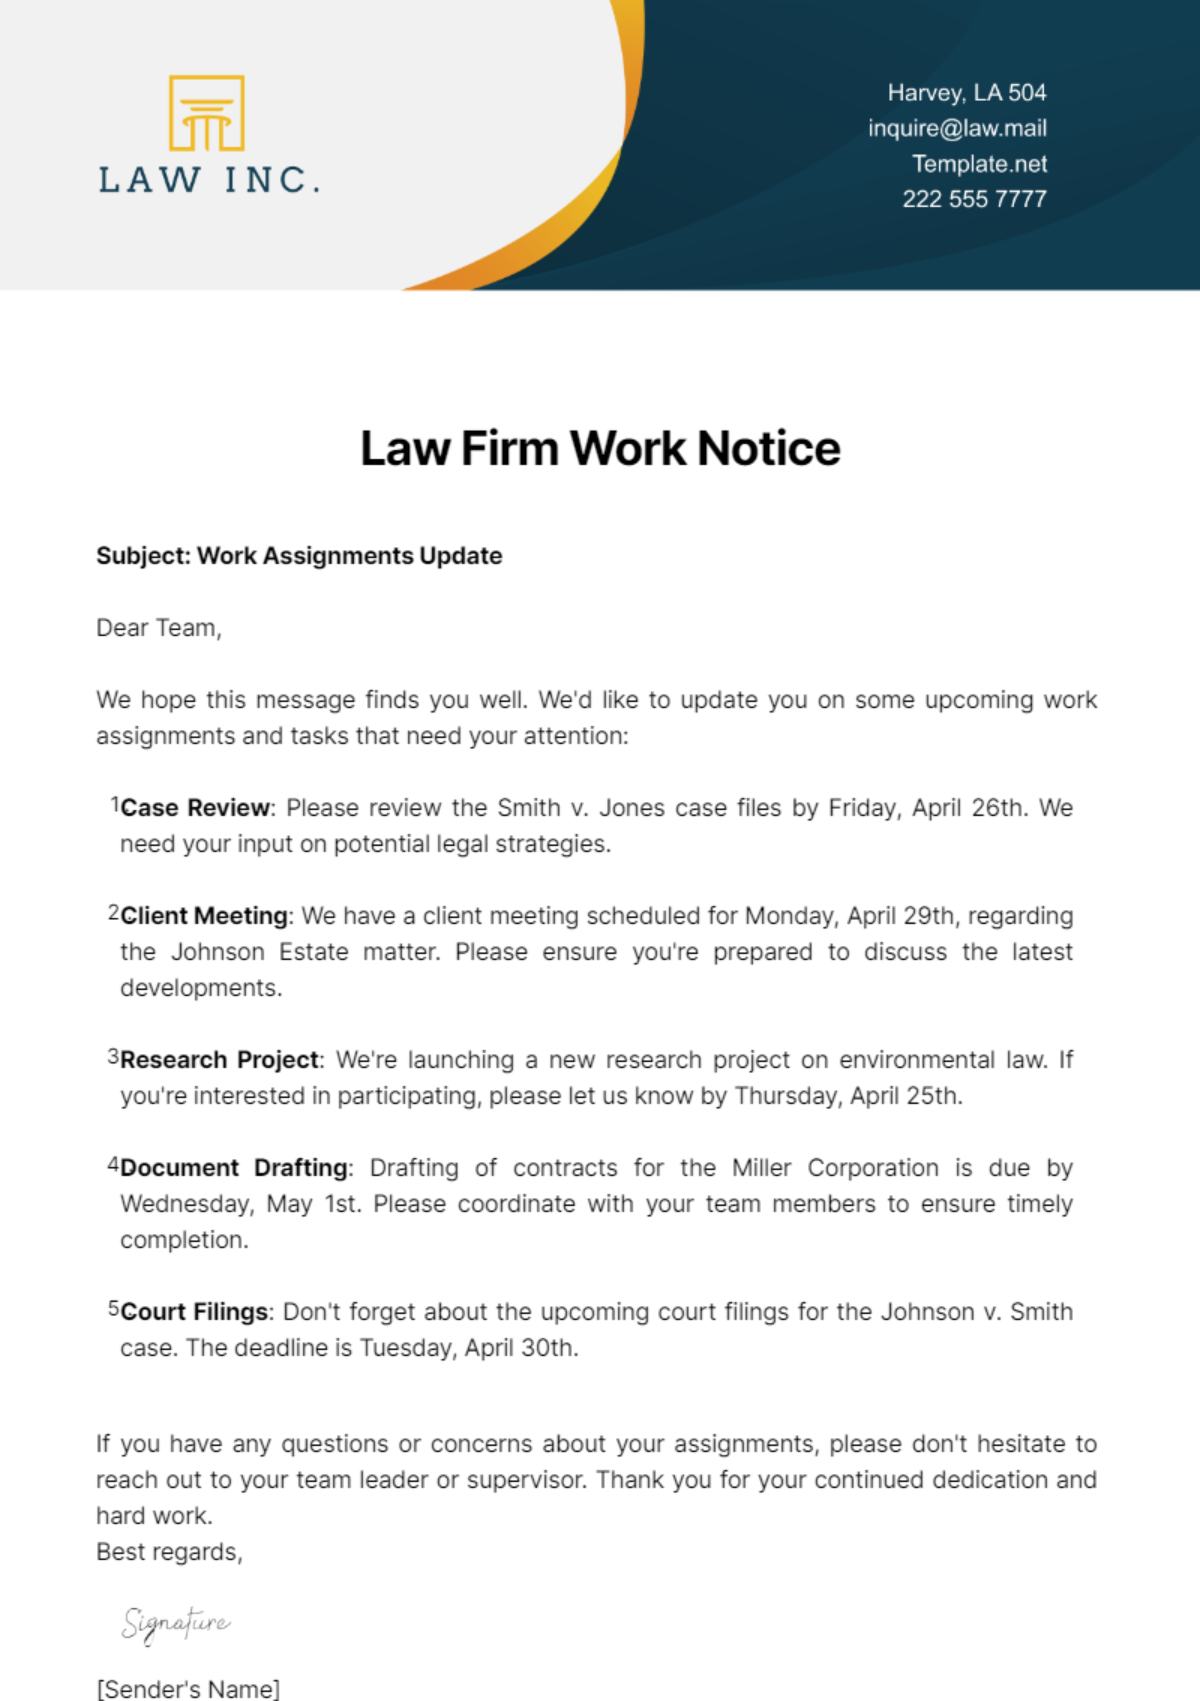 Law Firm Work Notice Template